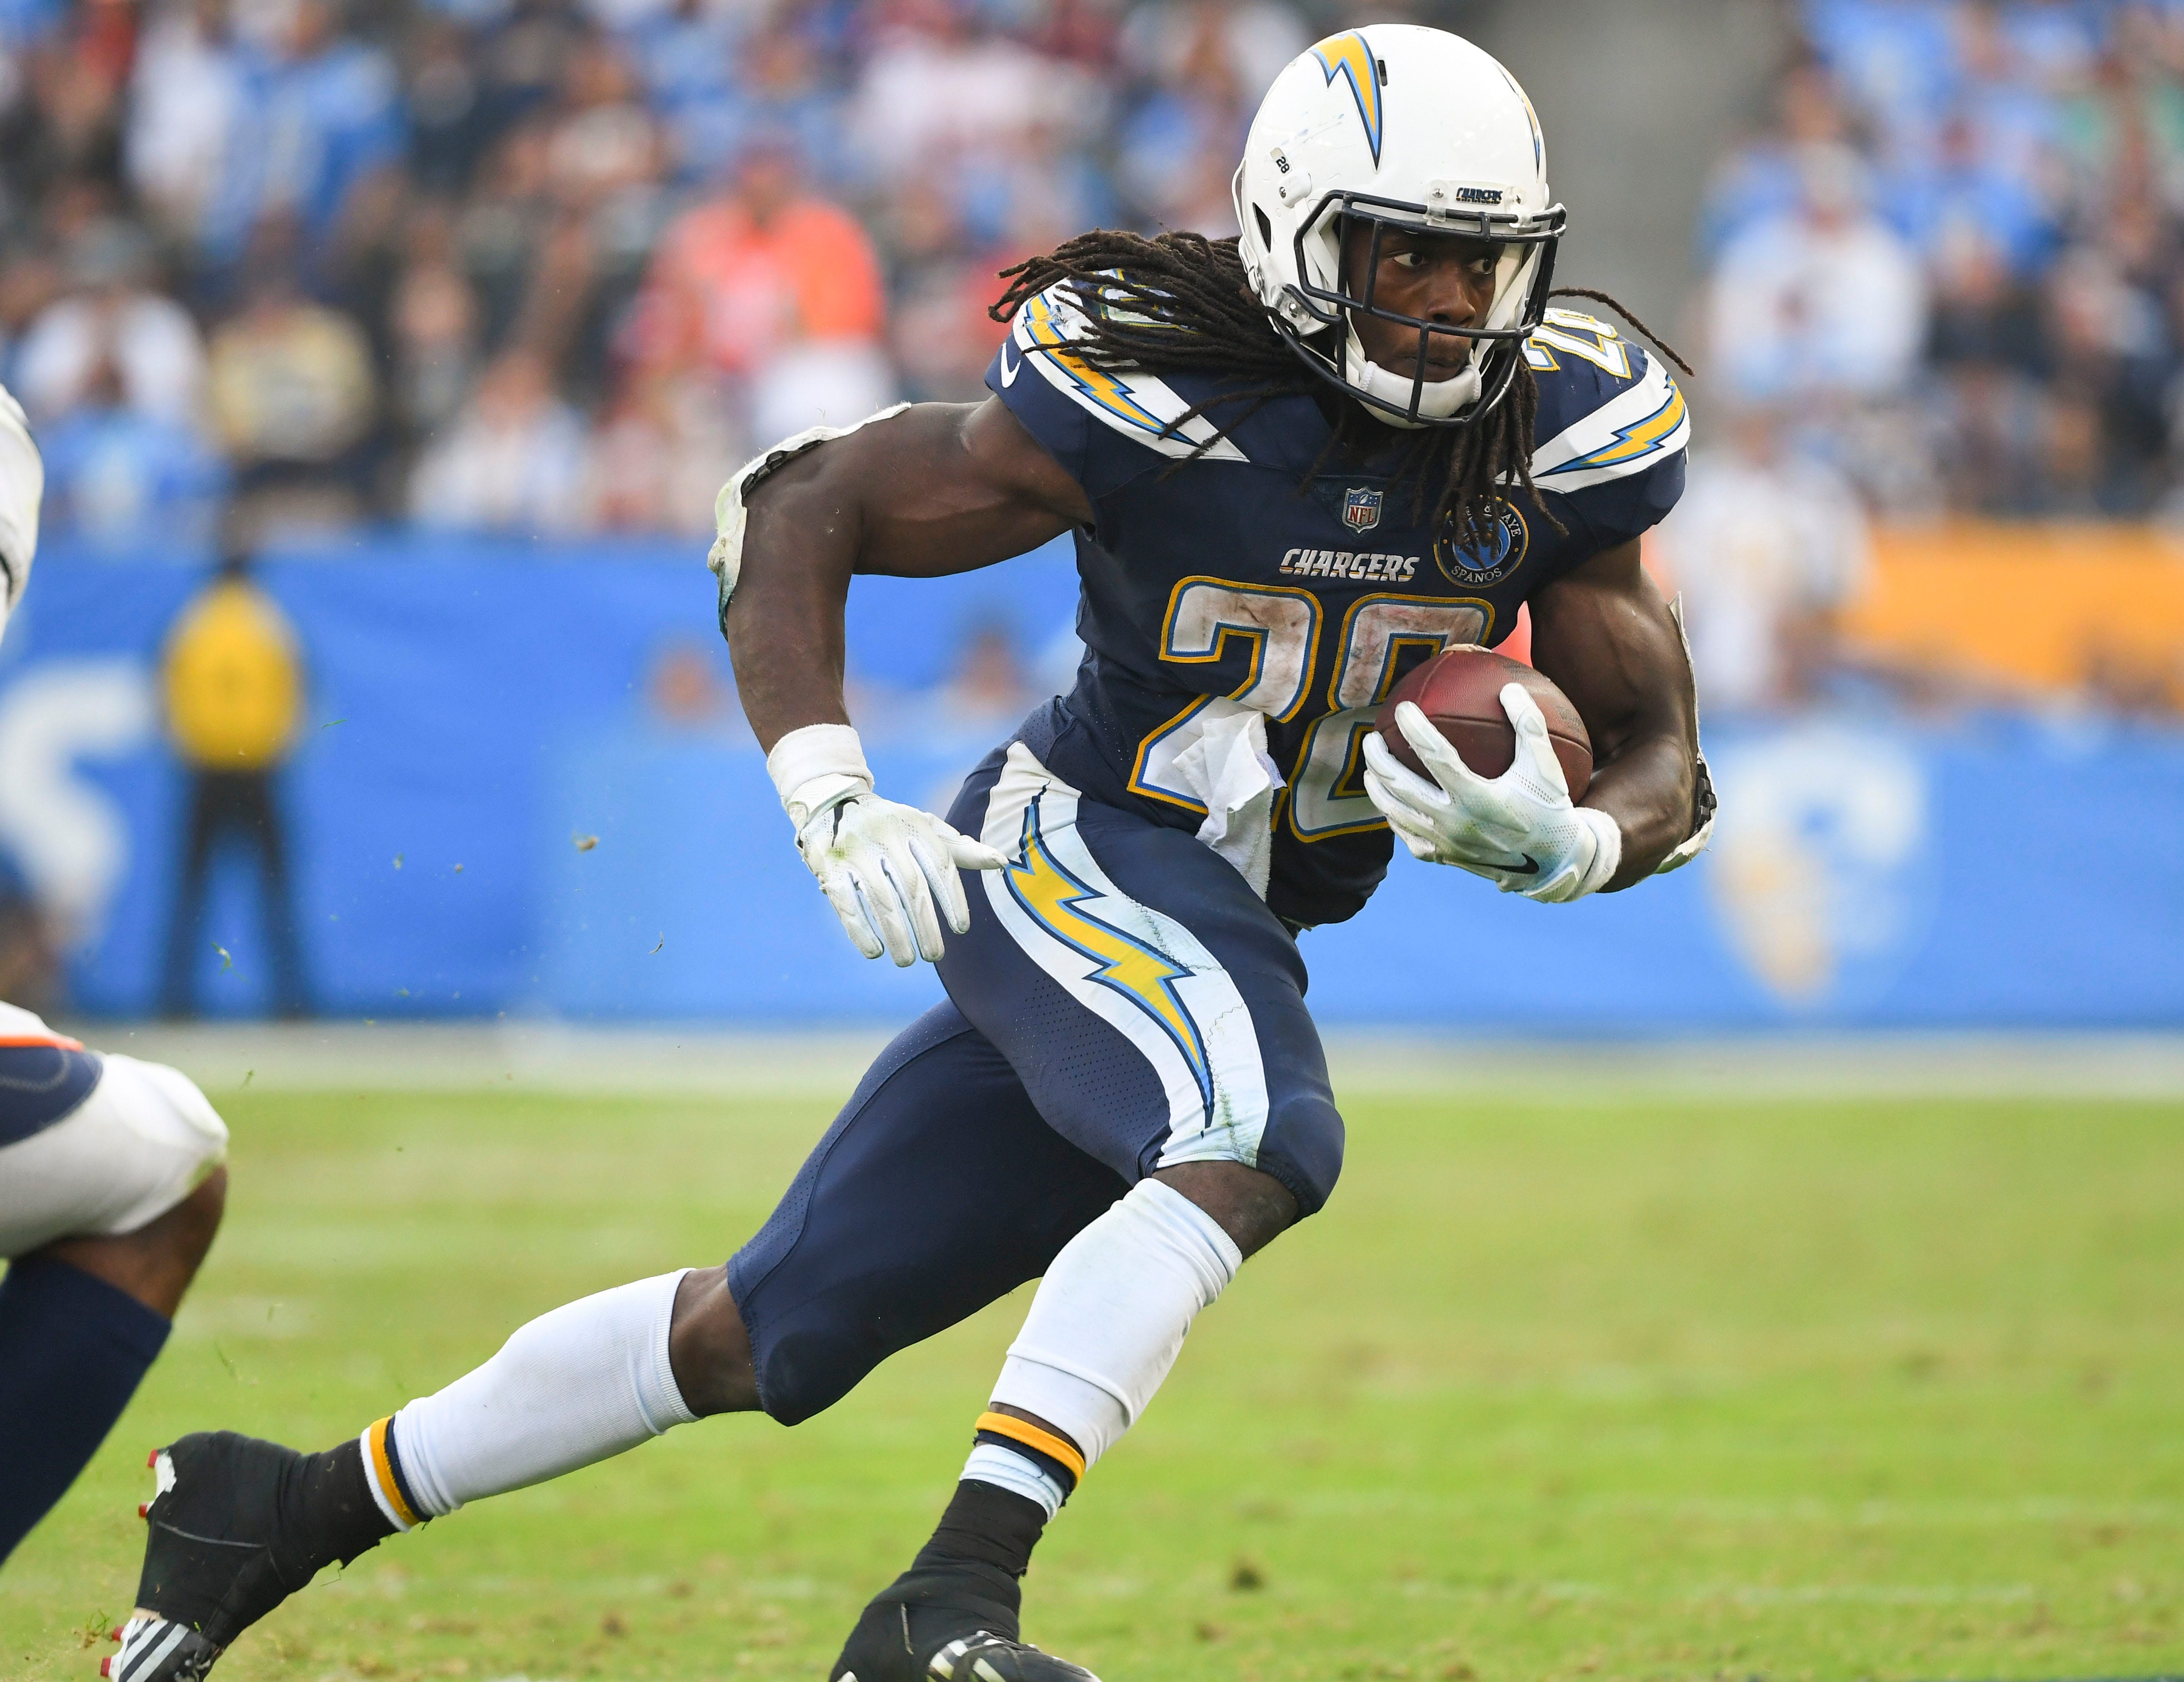 melvin gordon san diego chargers jersey